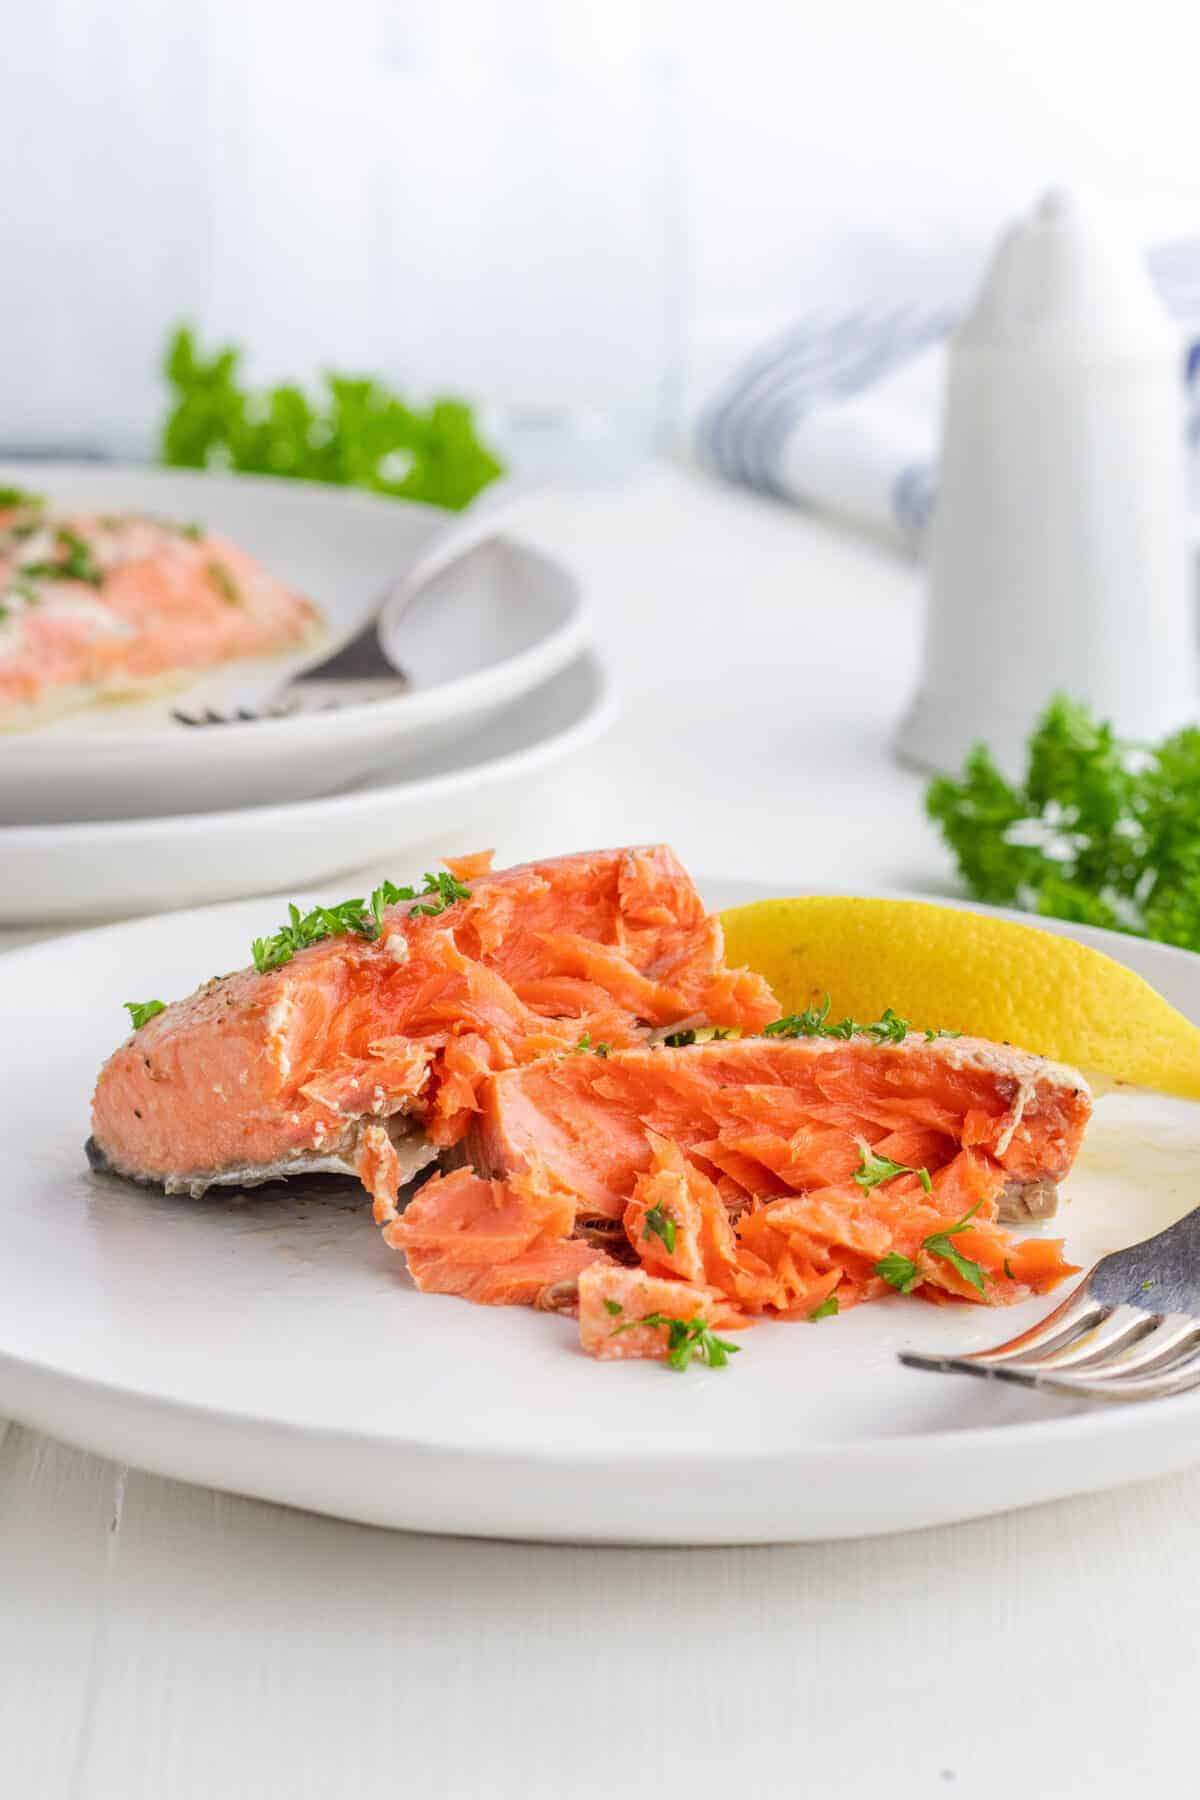 salmon fillet shredded with a fork